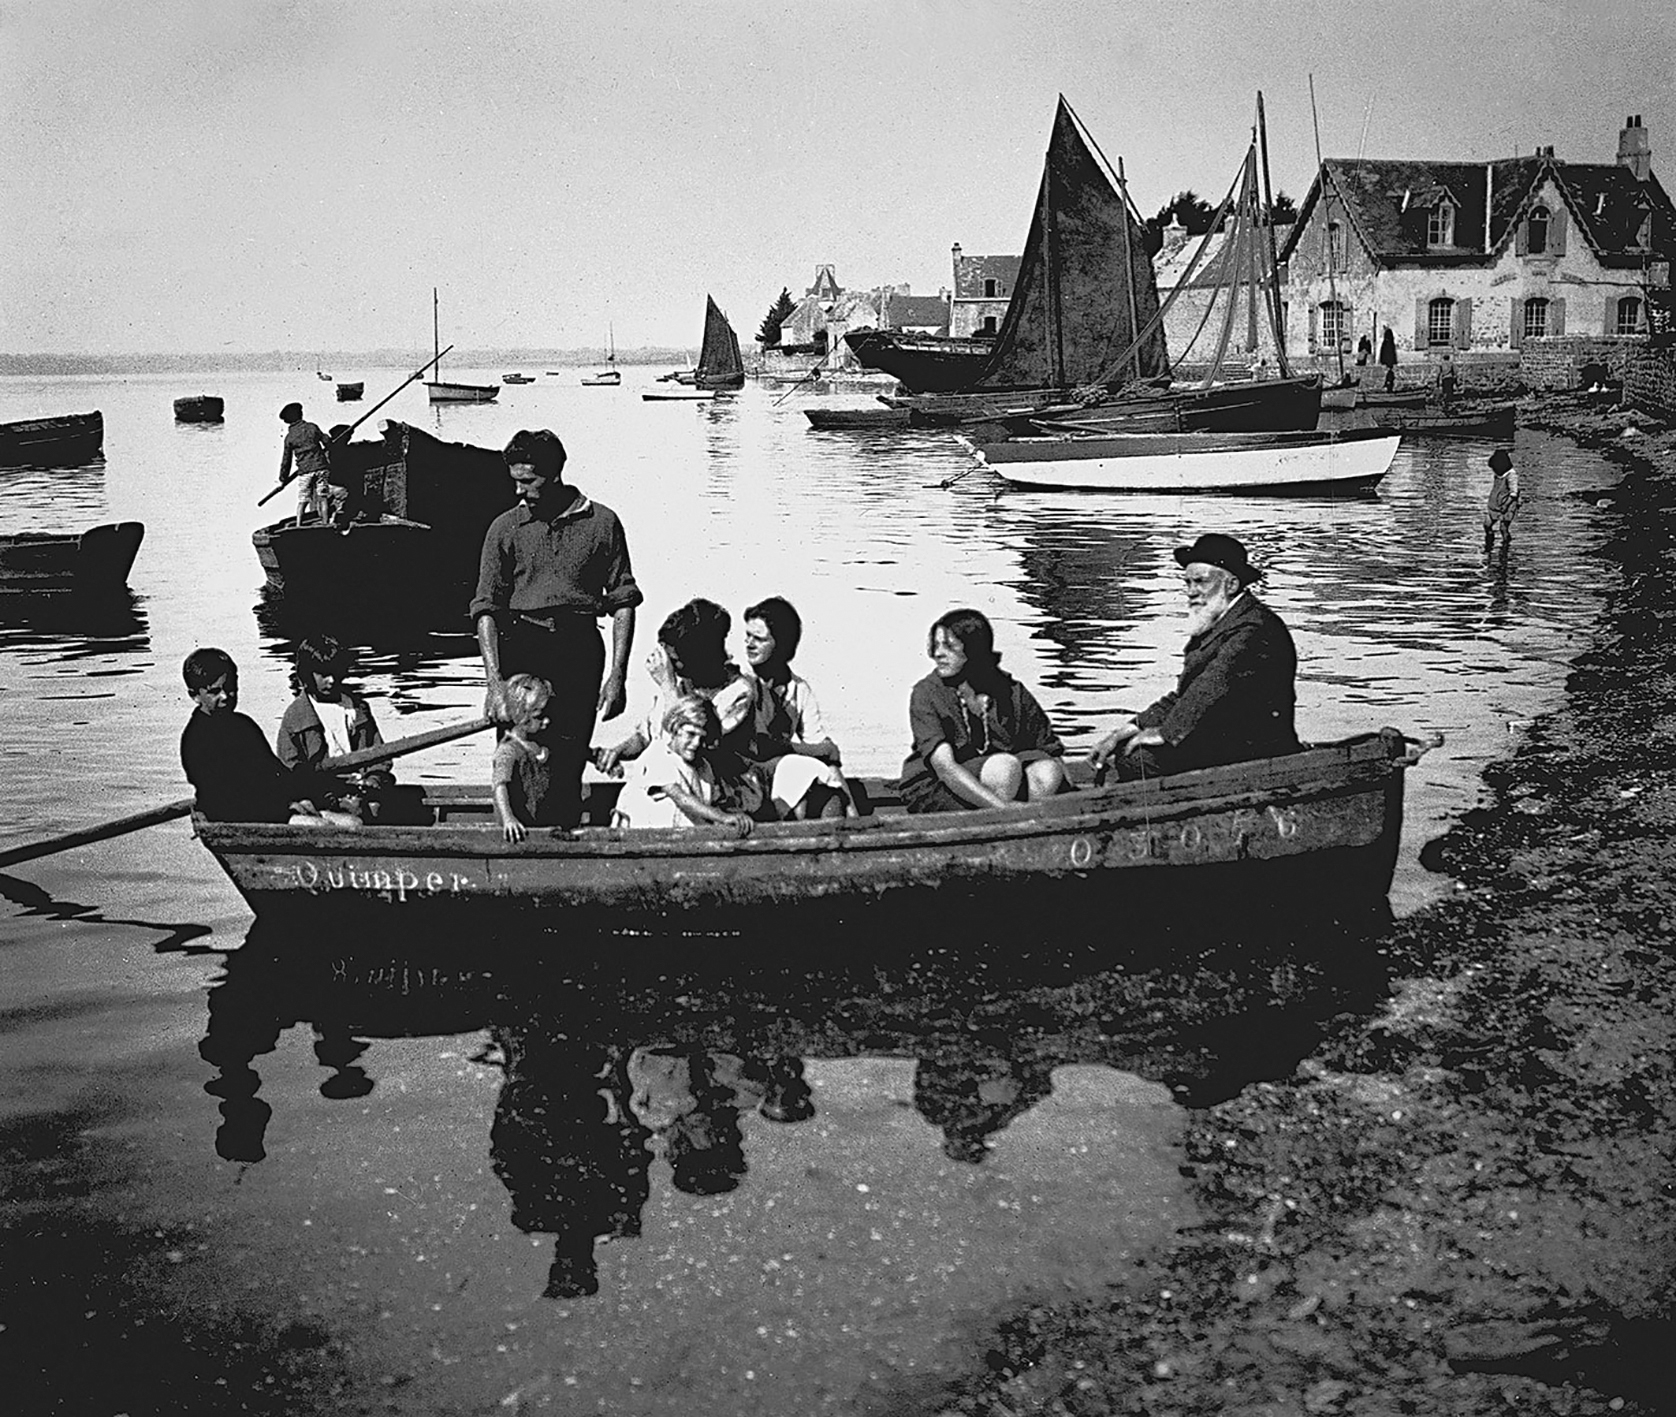 The Prouvé family on holiday, Ile-Tudy, Brittany. Victor Prouvé on the right, Jean Prouvé at the helm, ca. 1920.